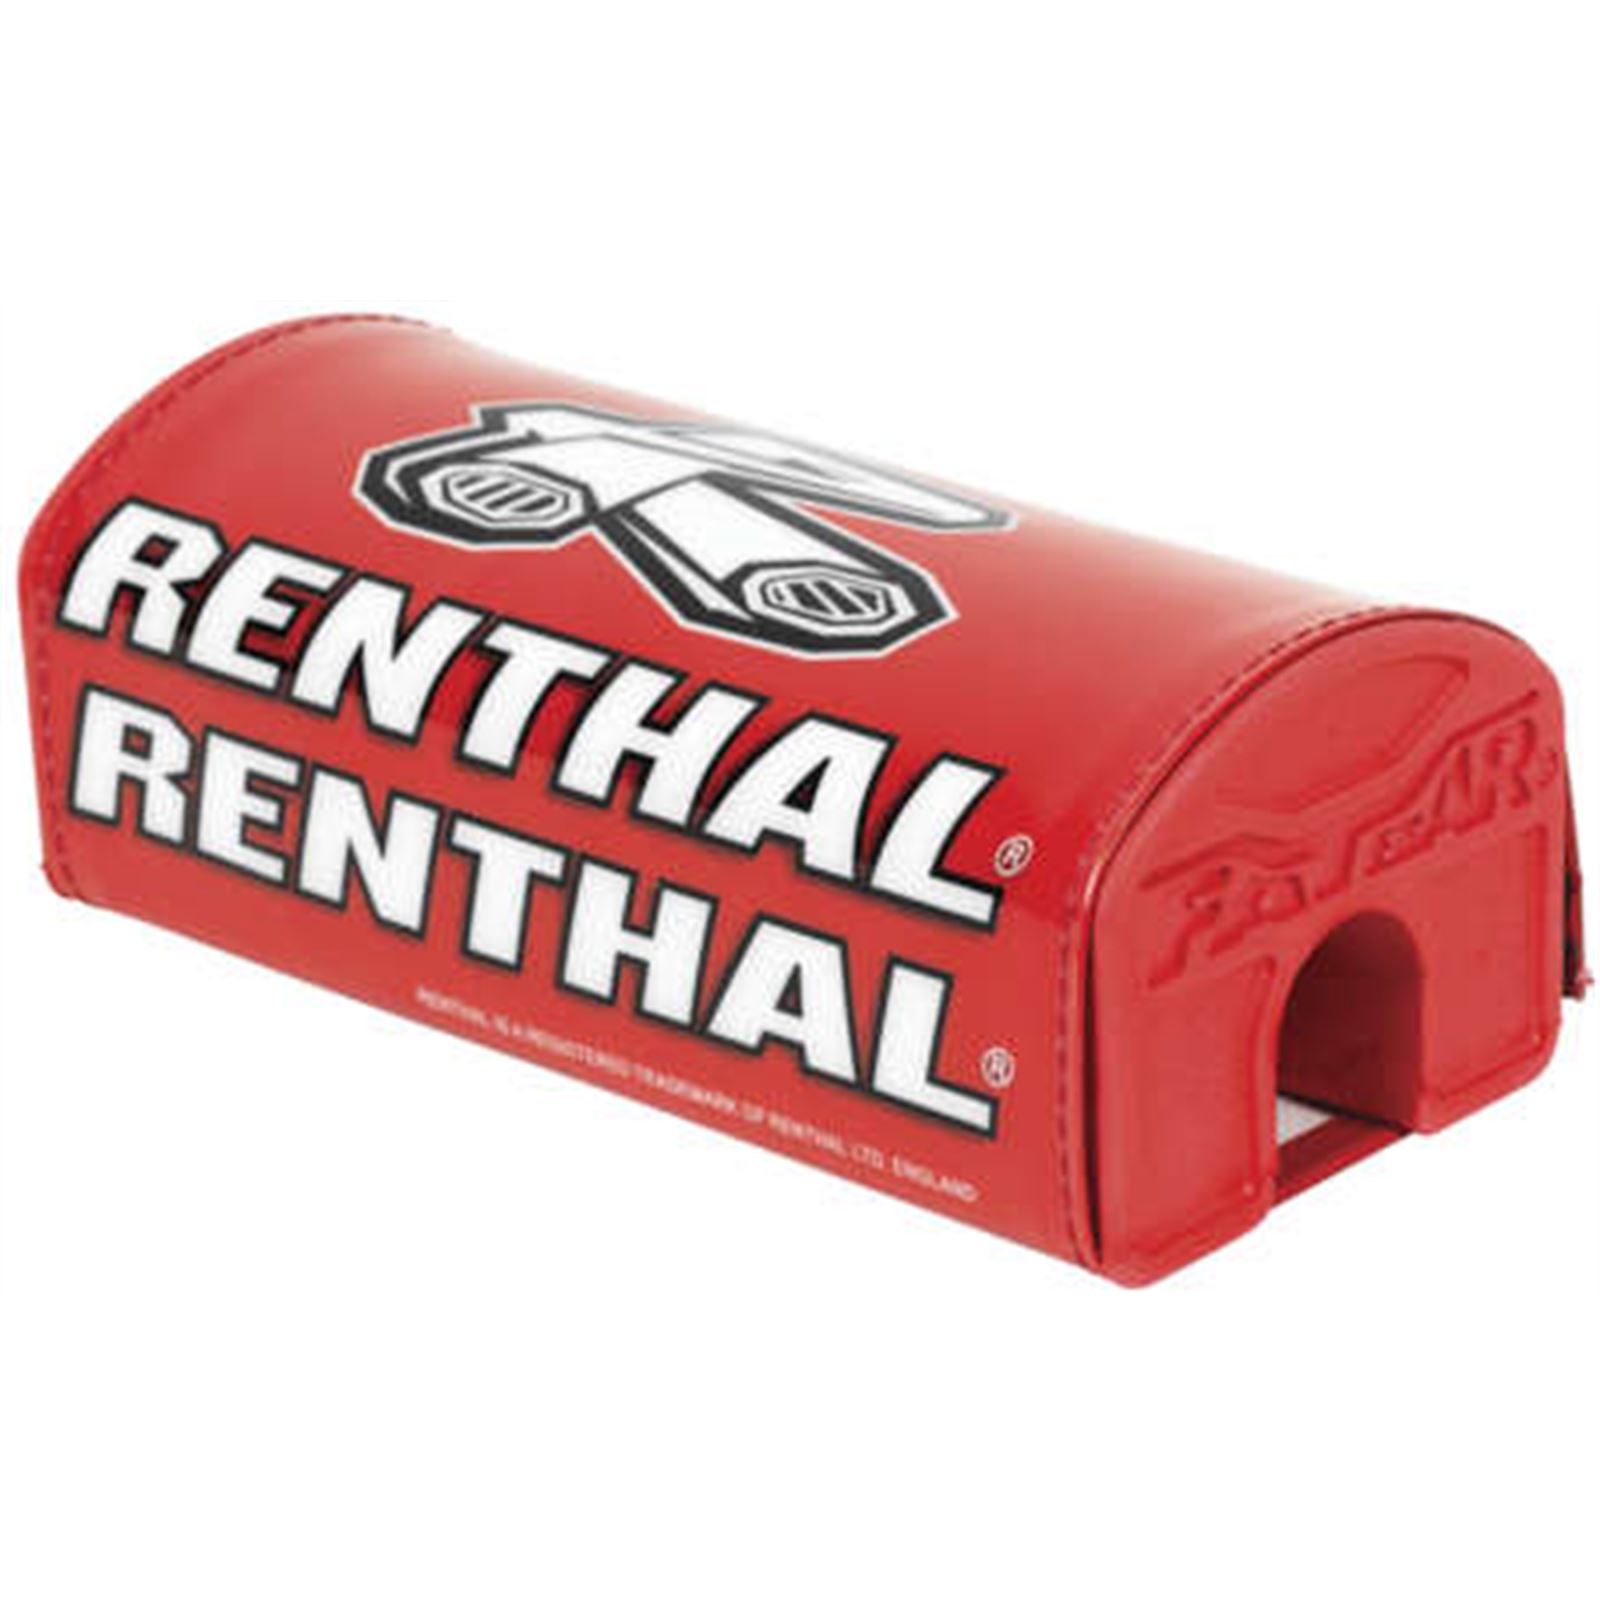 Renthal Limited Edition Renthal Fatbar™ Pad - Red